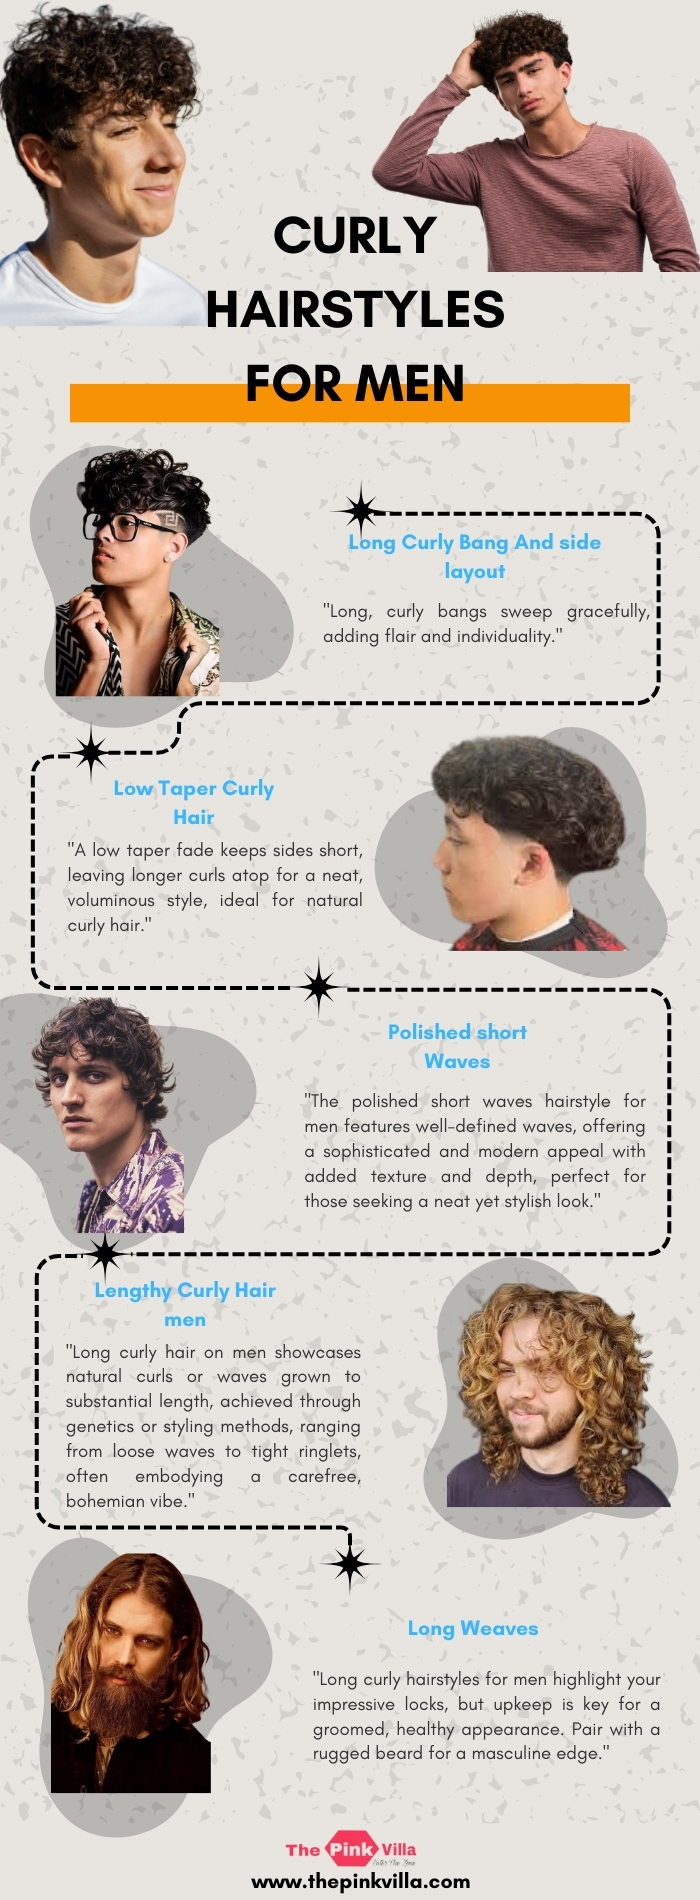 CURLY HAIRSTYLES FOR MEN